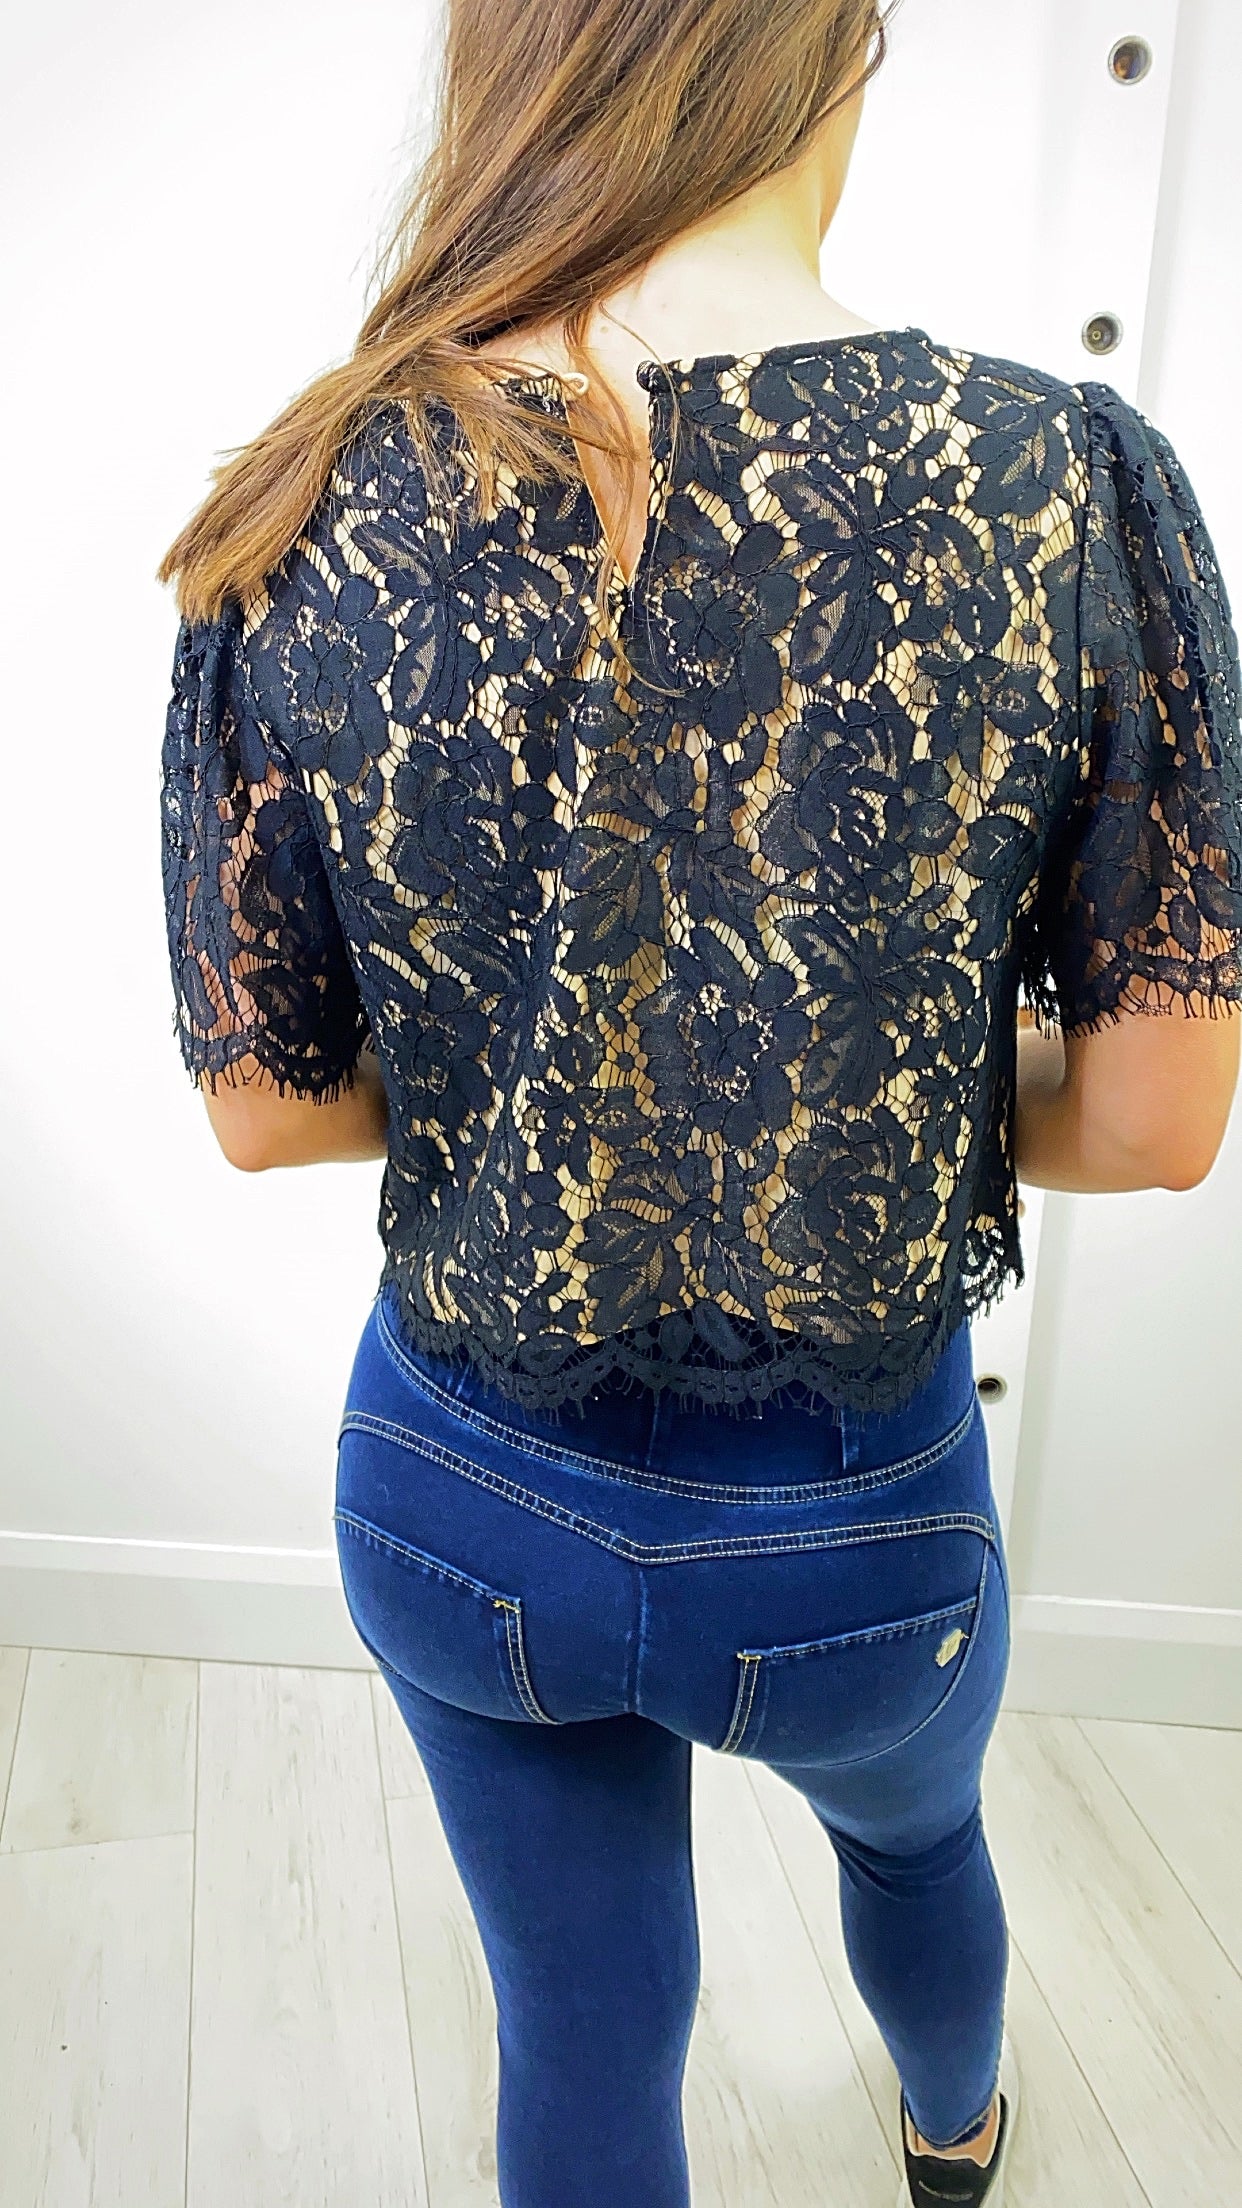 DARLING Lace Top